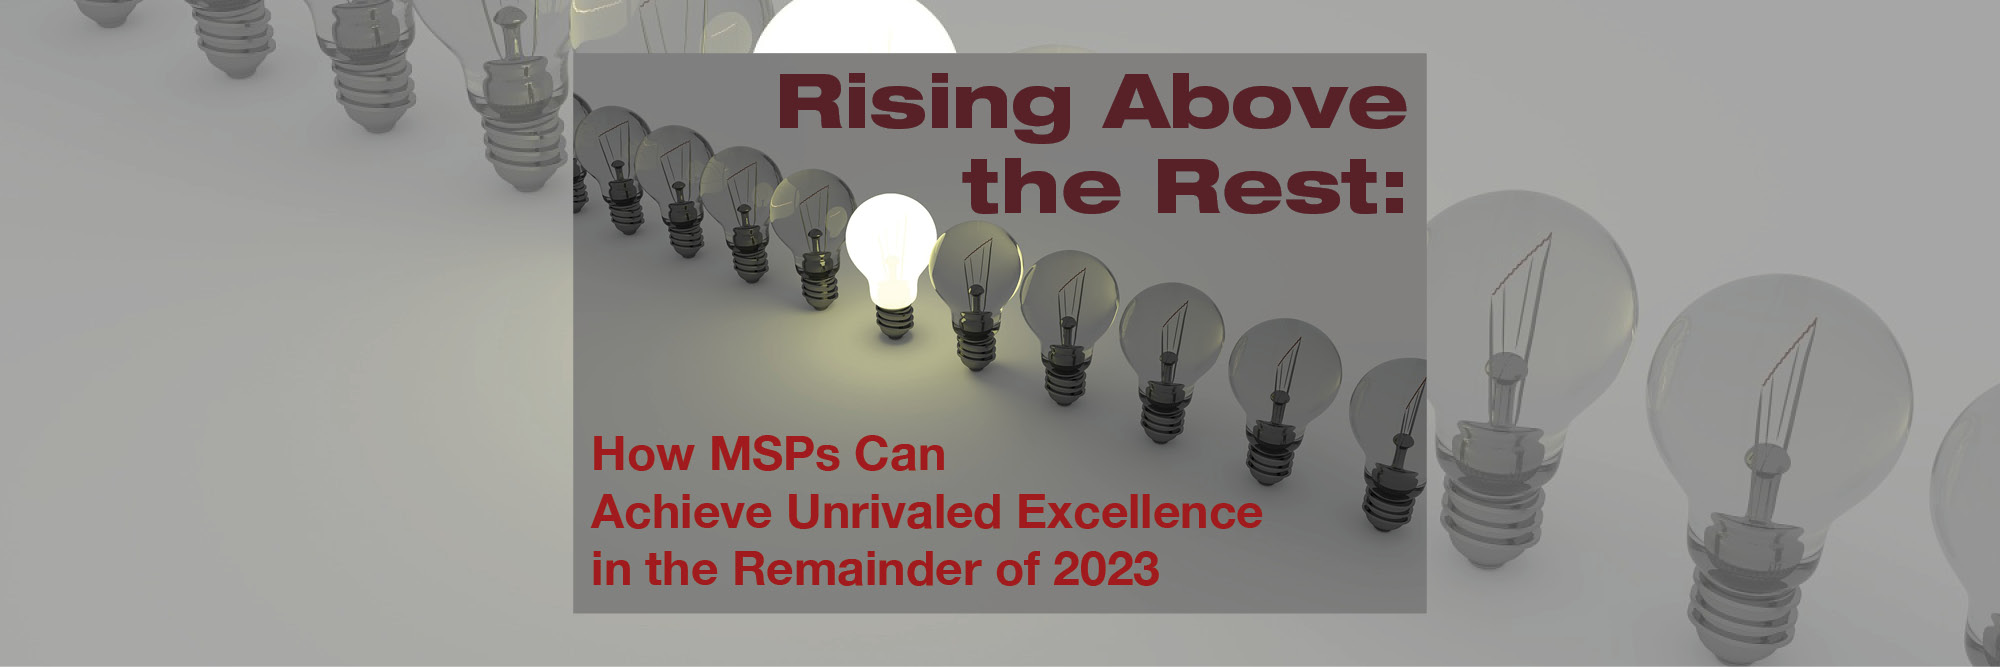 Rising Above the Rest: How MSPs Can Achieve Unrivaled Excellence in the Remainder of 2023